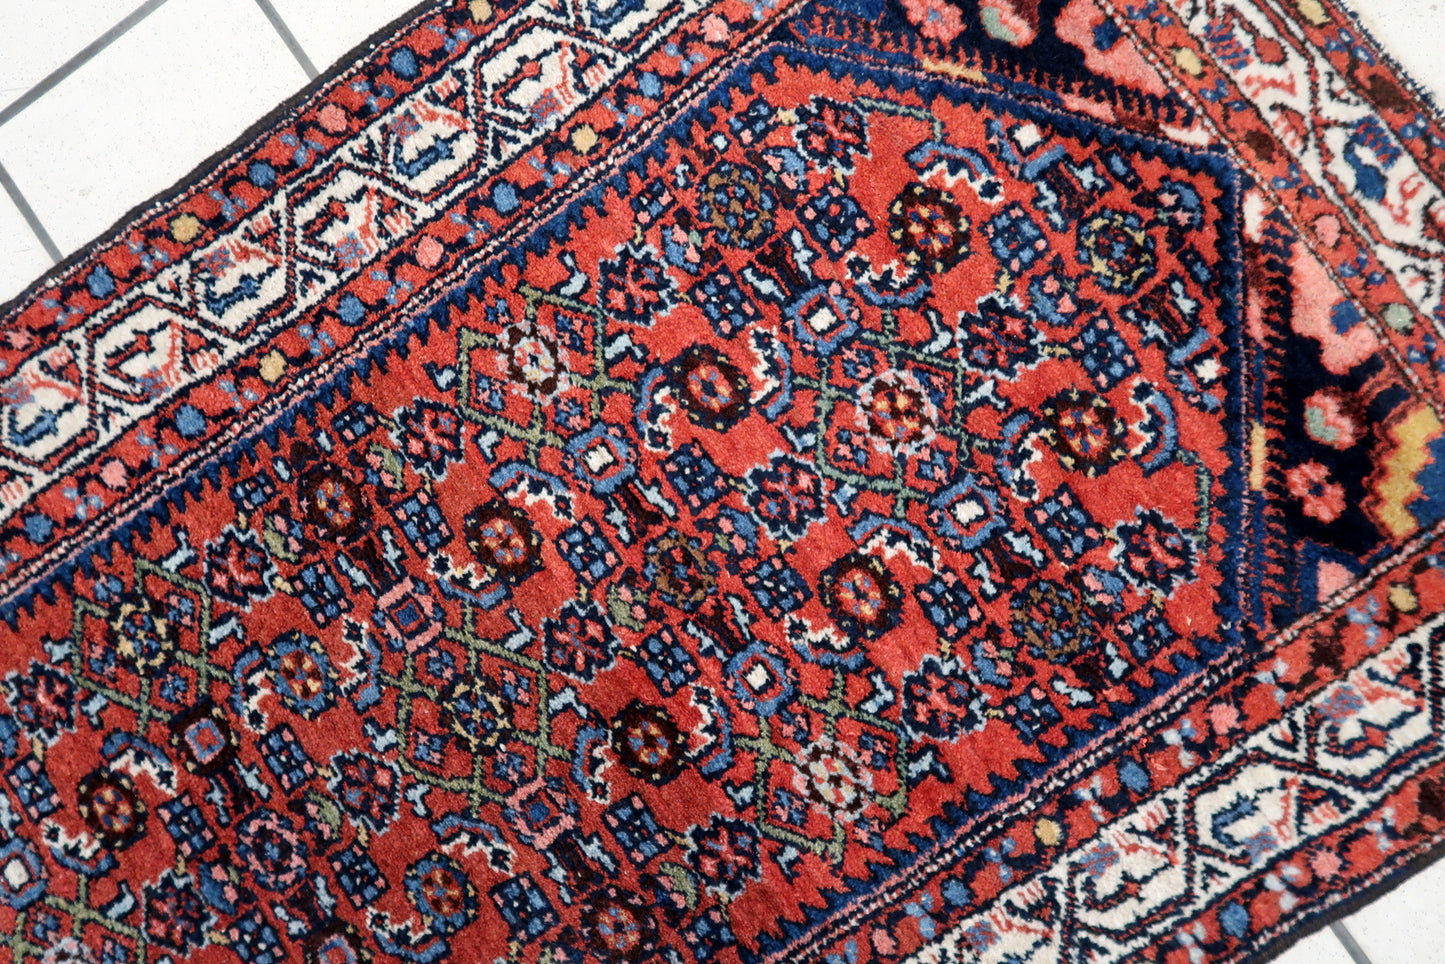 Overhead shot of the Hamadan rug displaying its rich color palette and detailed patterns